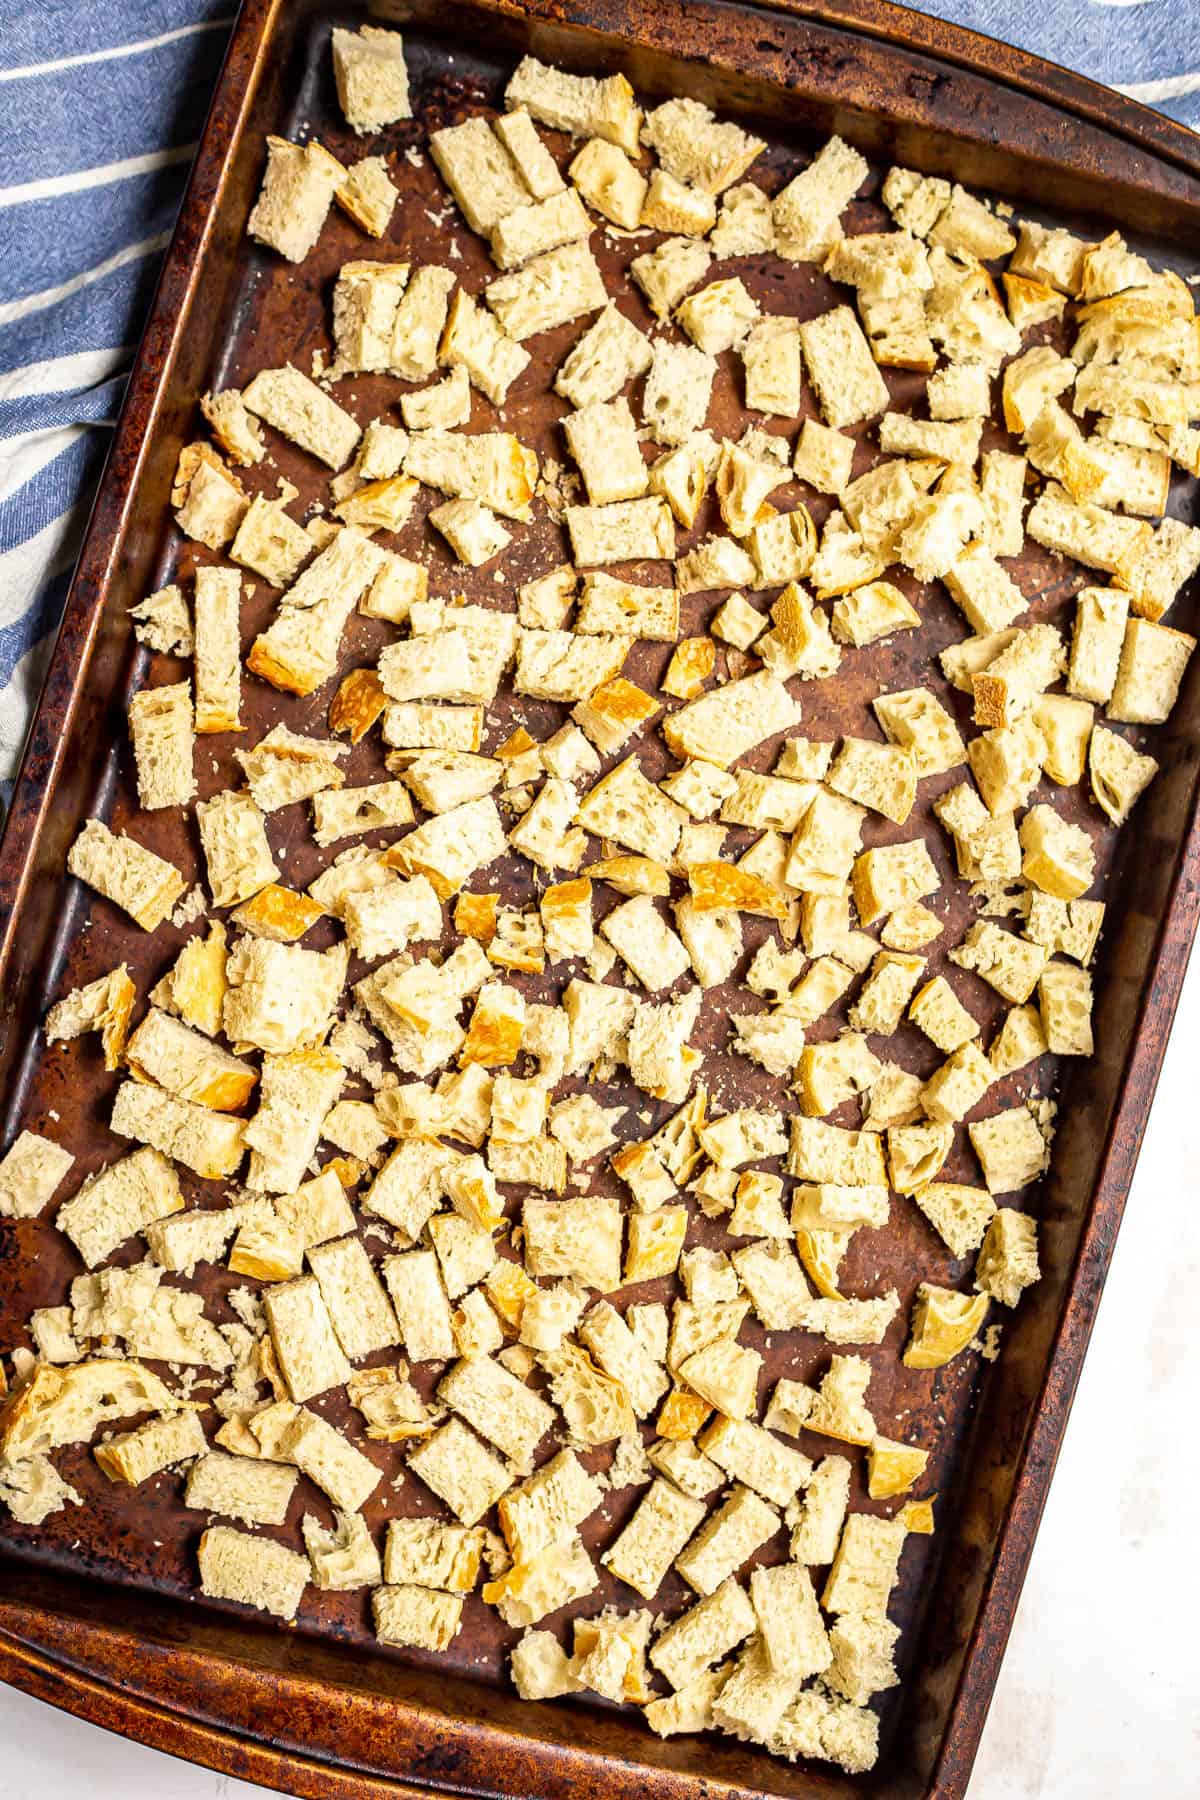 Cubed stale bread cubes on a baking sheet.